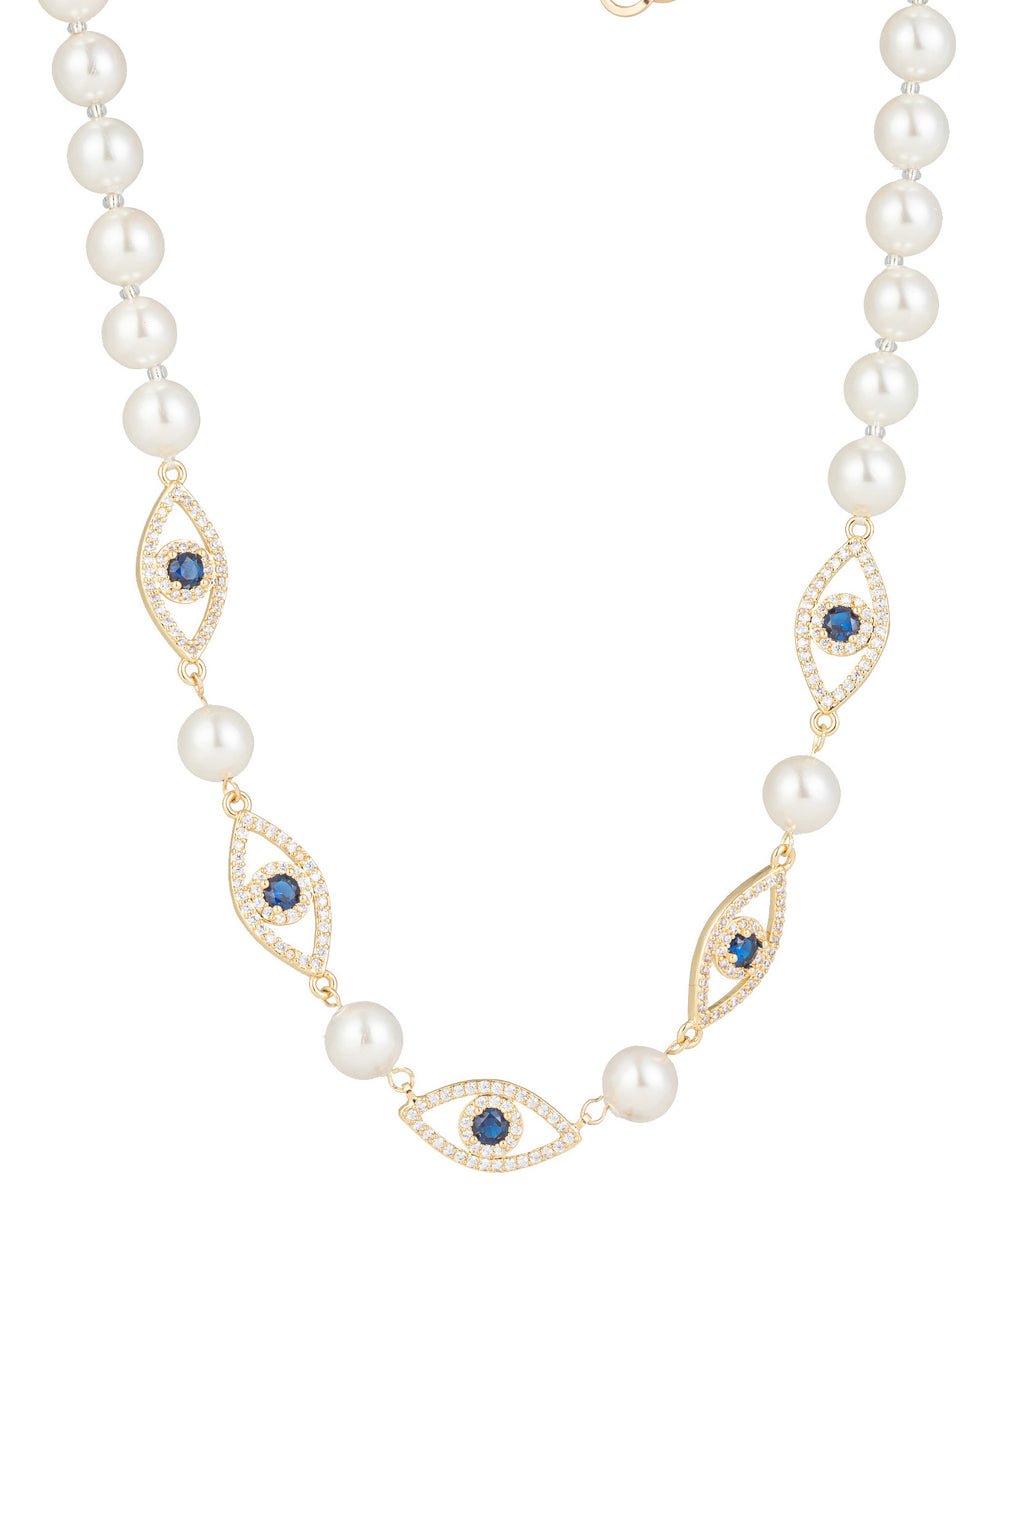 Eye pendant necklace studded with CZ crystals on a shell pearl band.